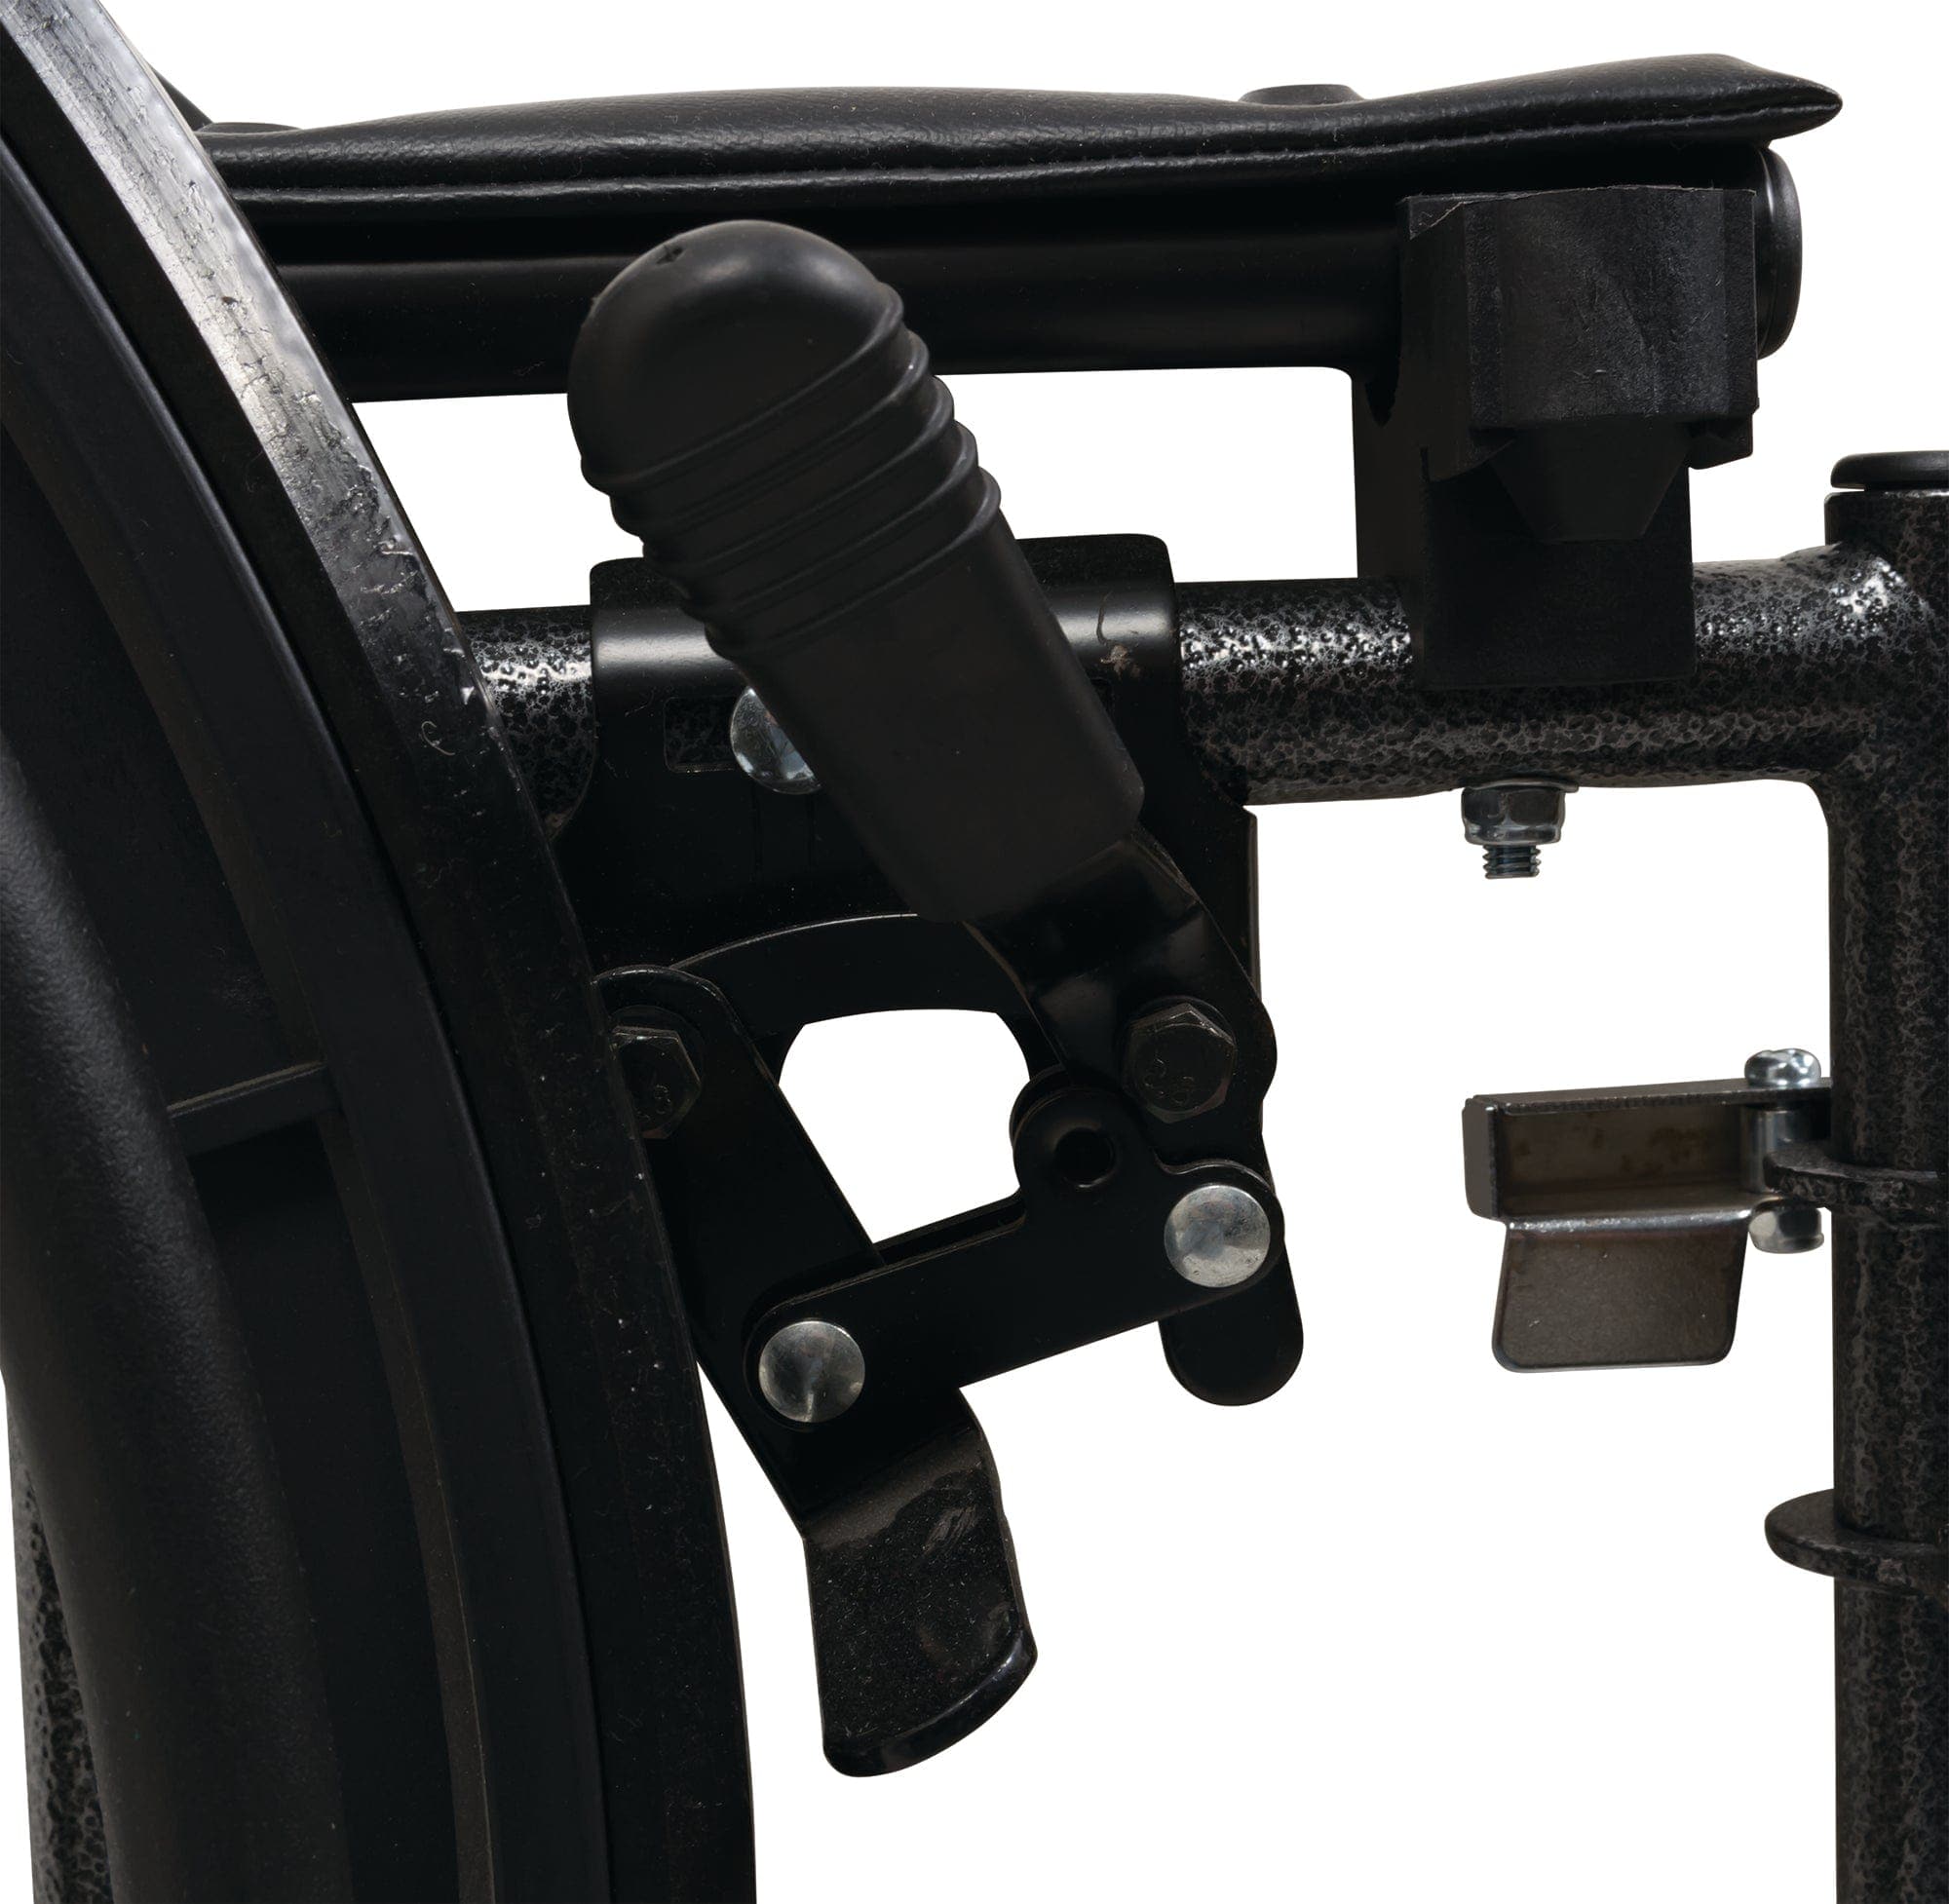 Compass Health K2 Wheelchairs Compass Health ProBasics K2 Wheelchair with 18" x 16" Seat and Swing-Away Footrests